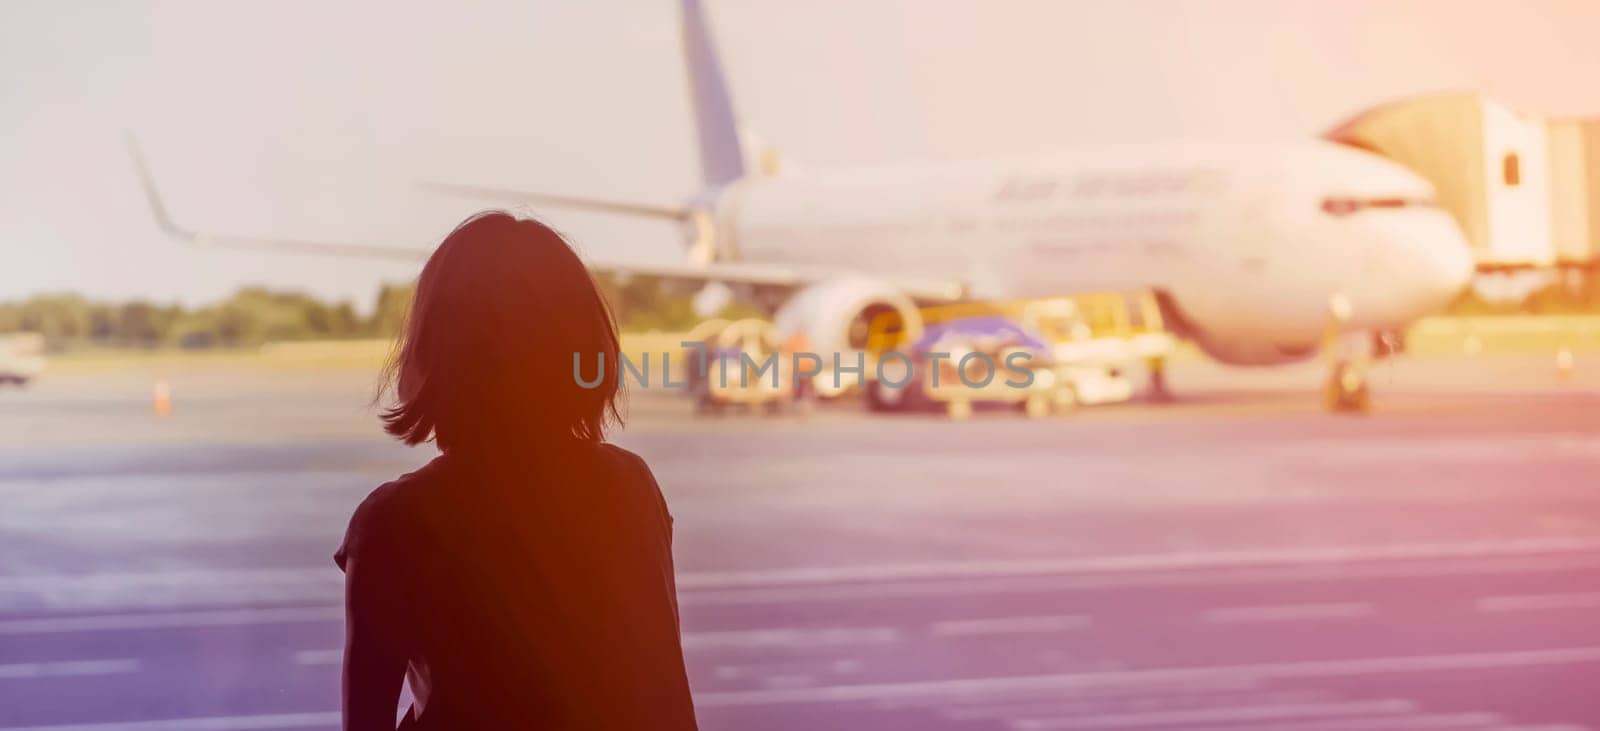 A young girl at the airport is boarding a plane at sunset, a woman goes on a journey.